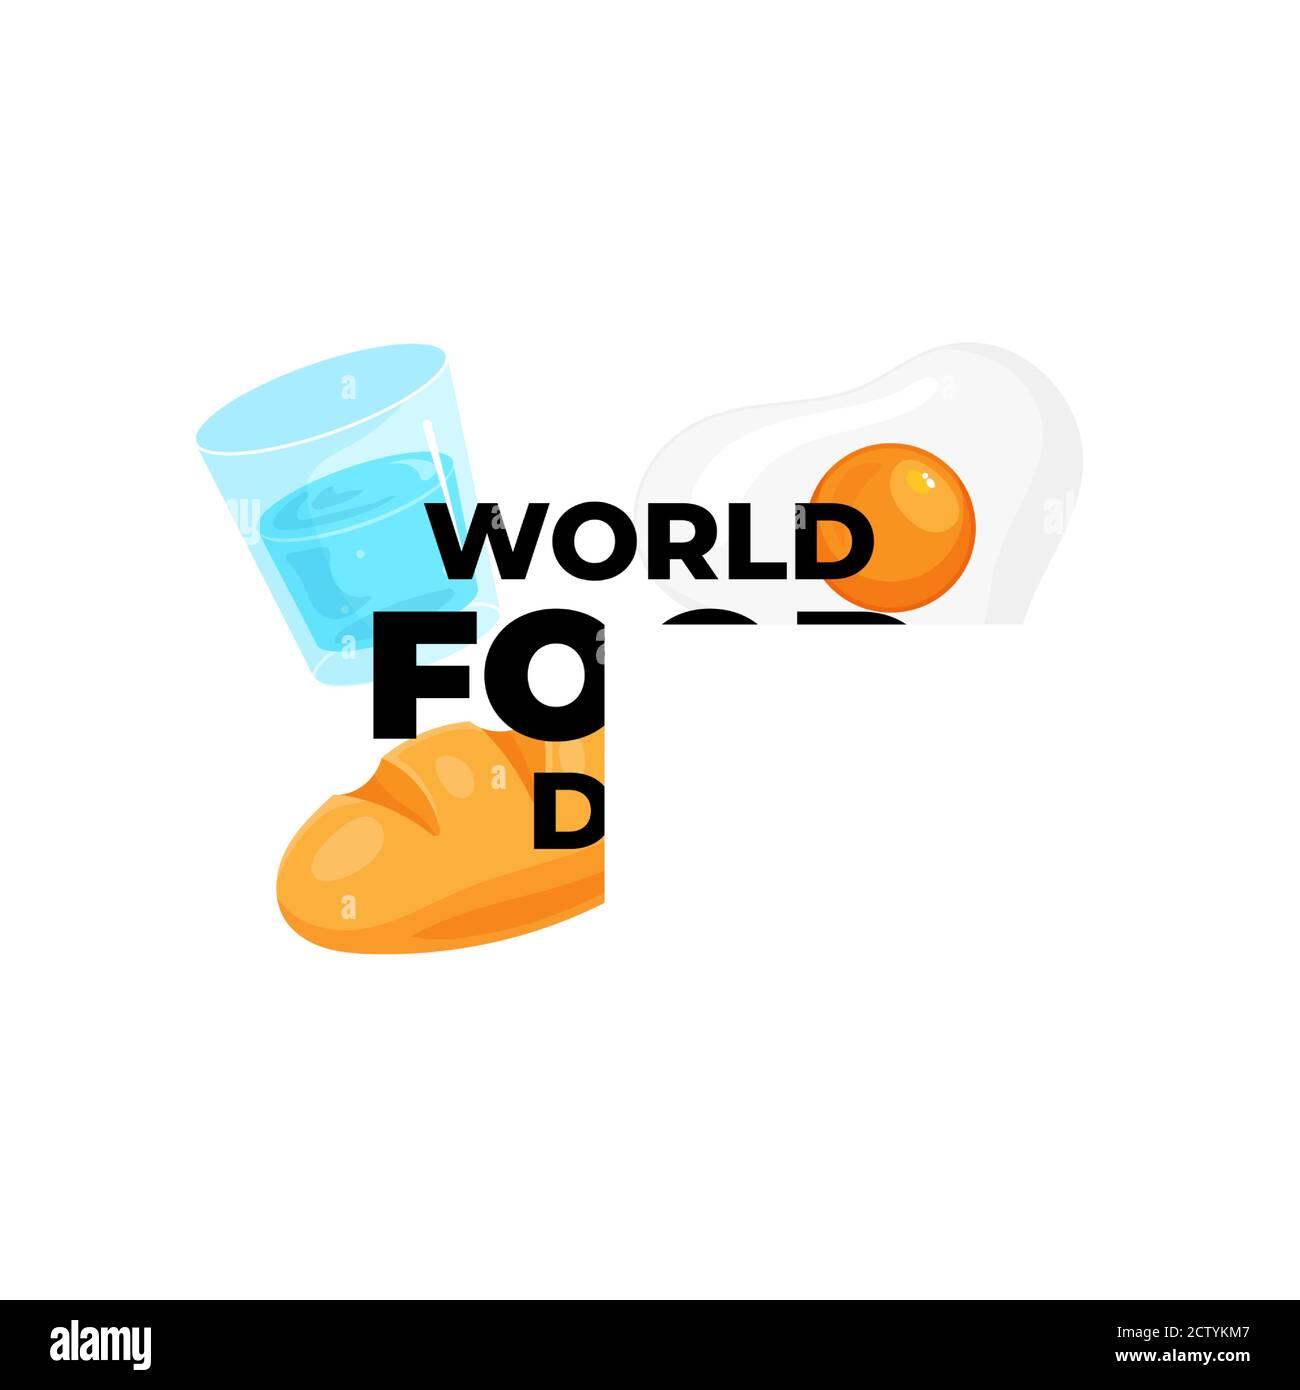 World food day celebration text on beard egg drink water vector illustration for world food day poster background concept design Stock Vector